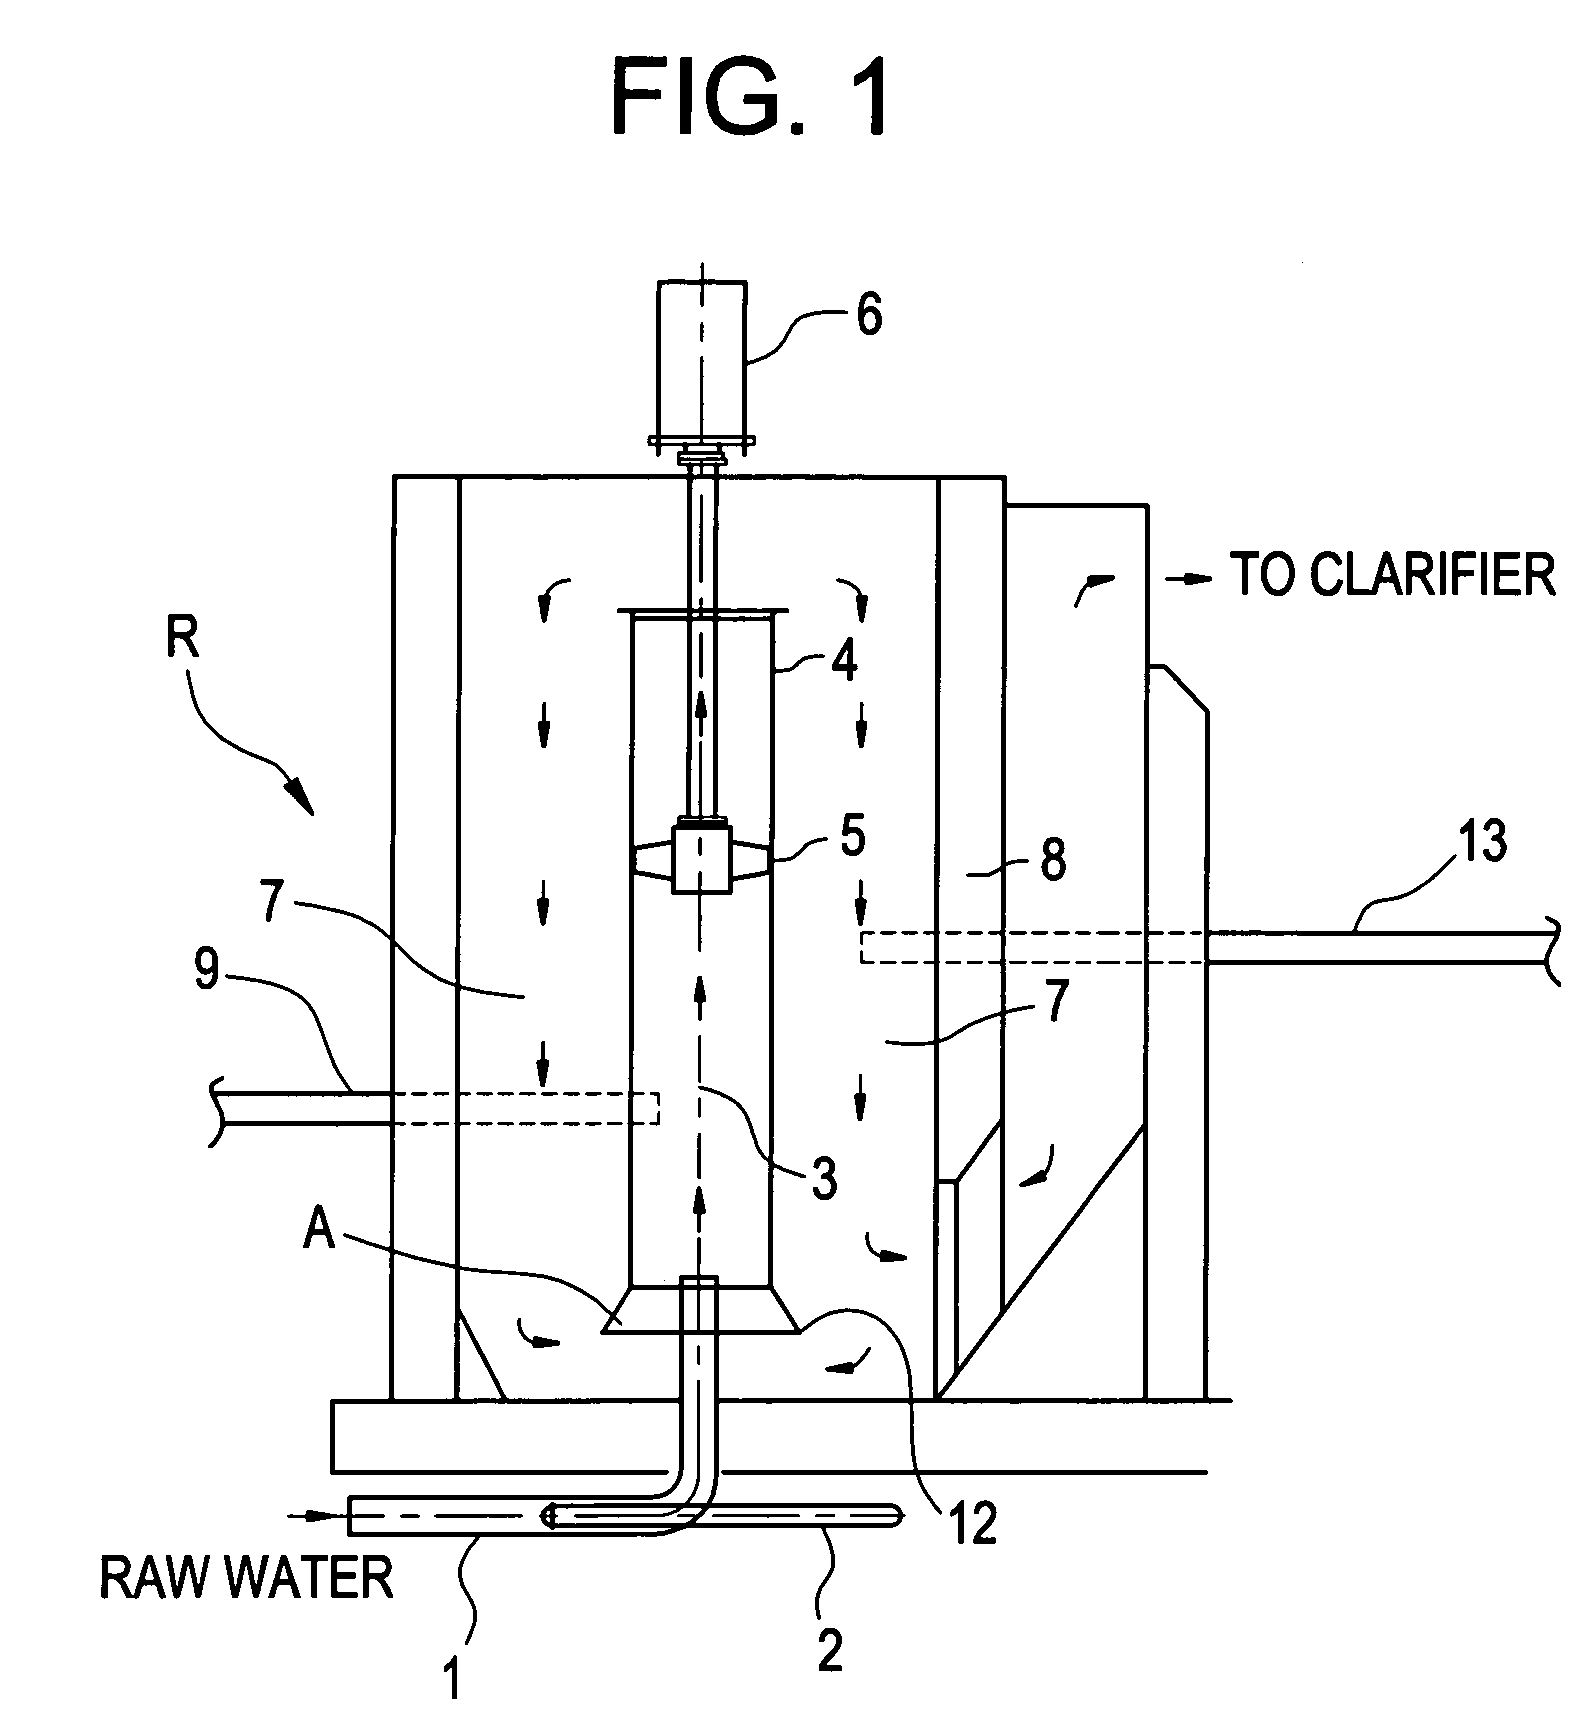 Method and apparatus for treating water or wastewater to reduce organic and hardness contamination